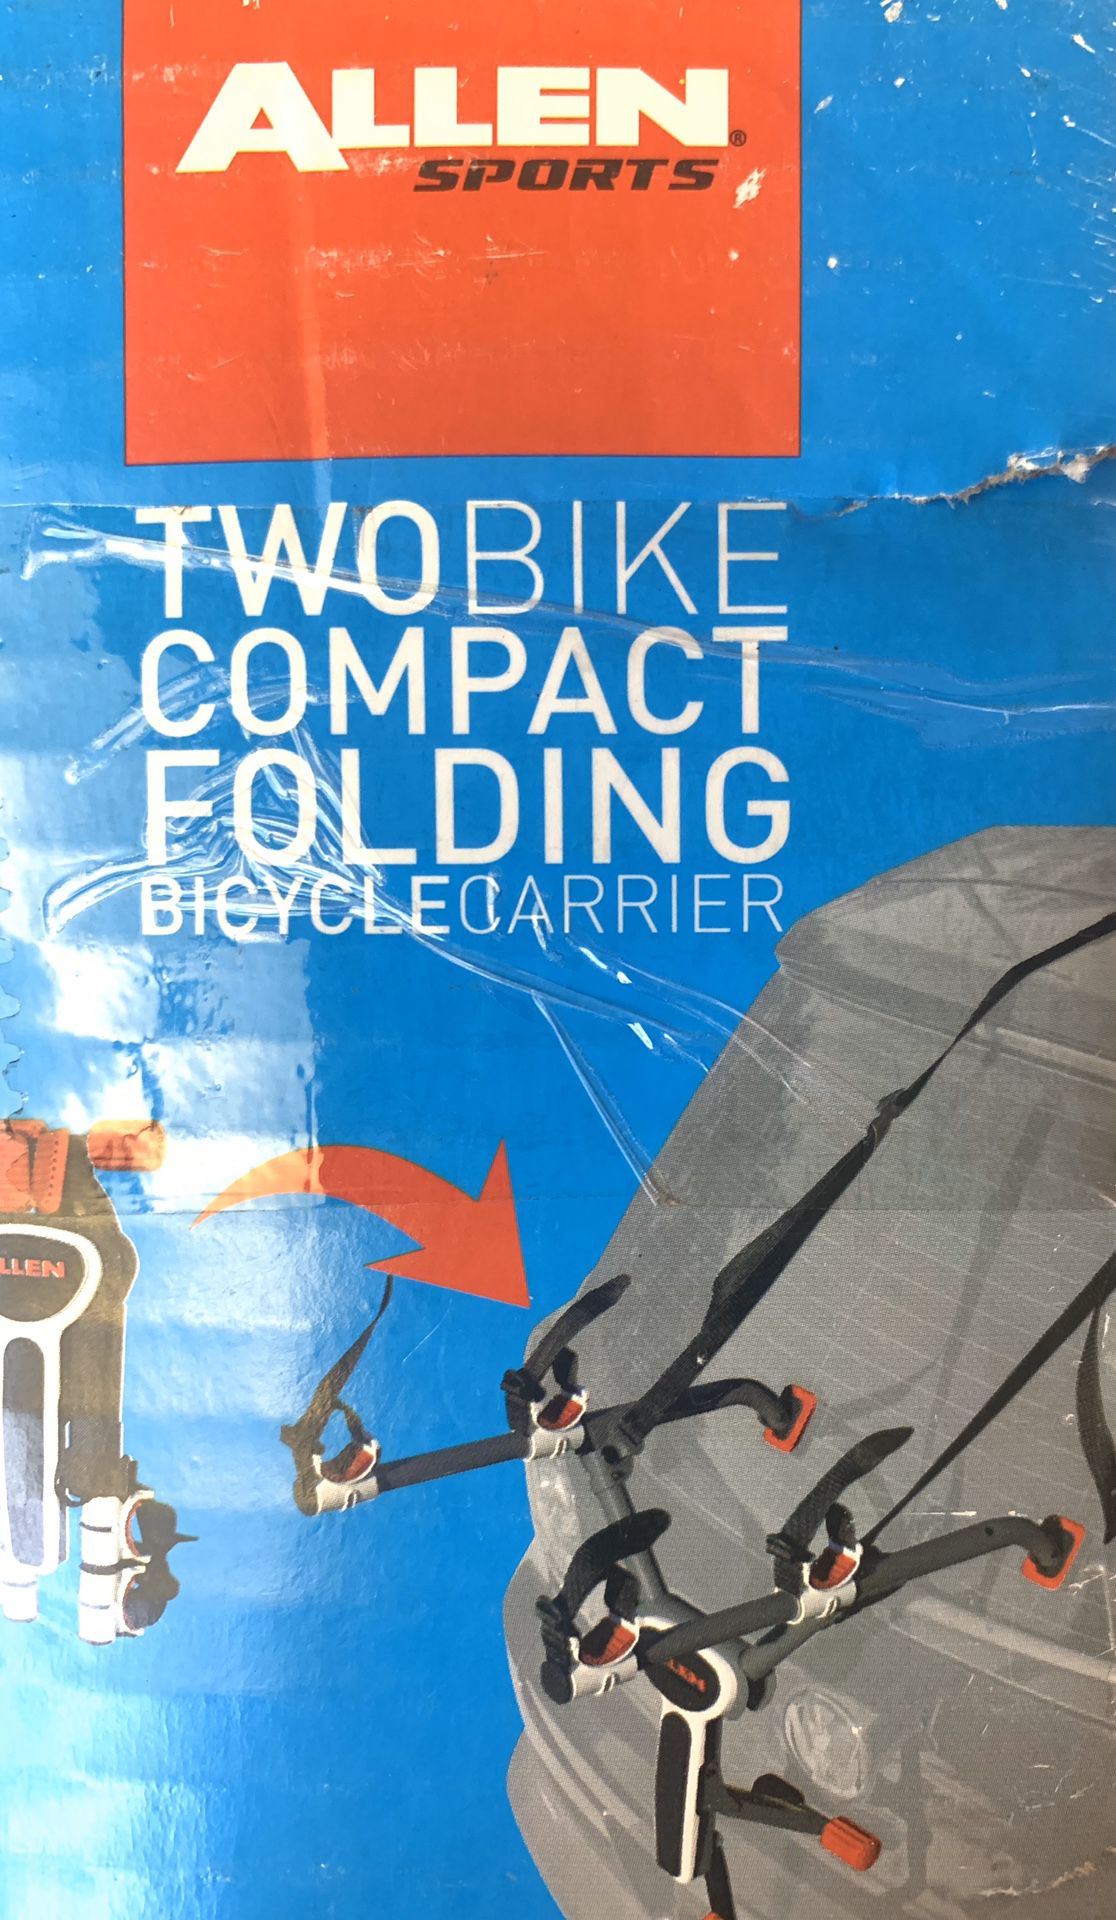 New Two bike compact folding bicycle carrier $25 for pick up only